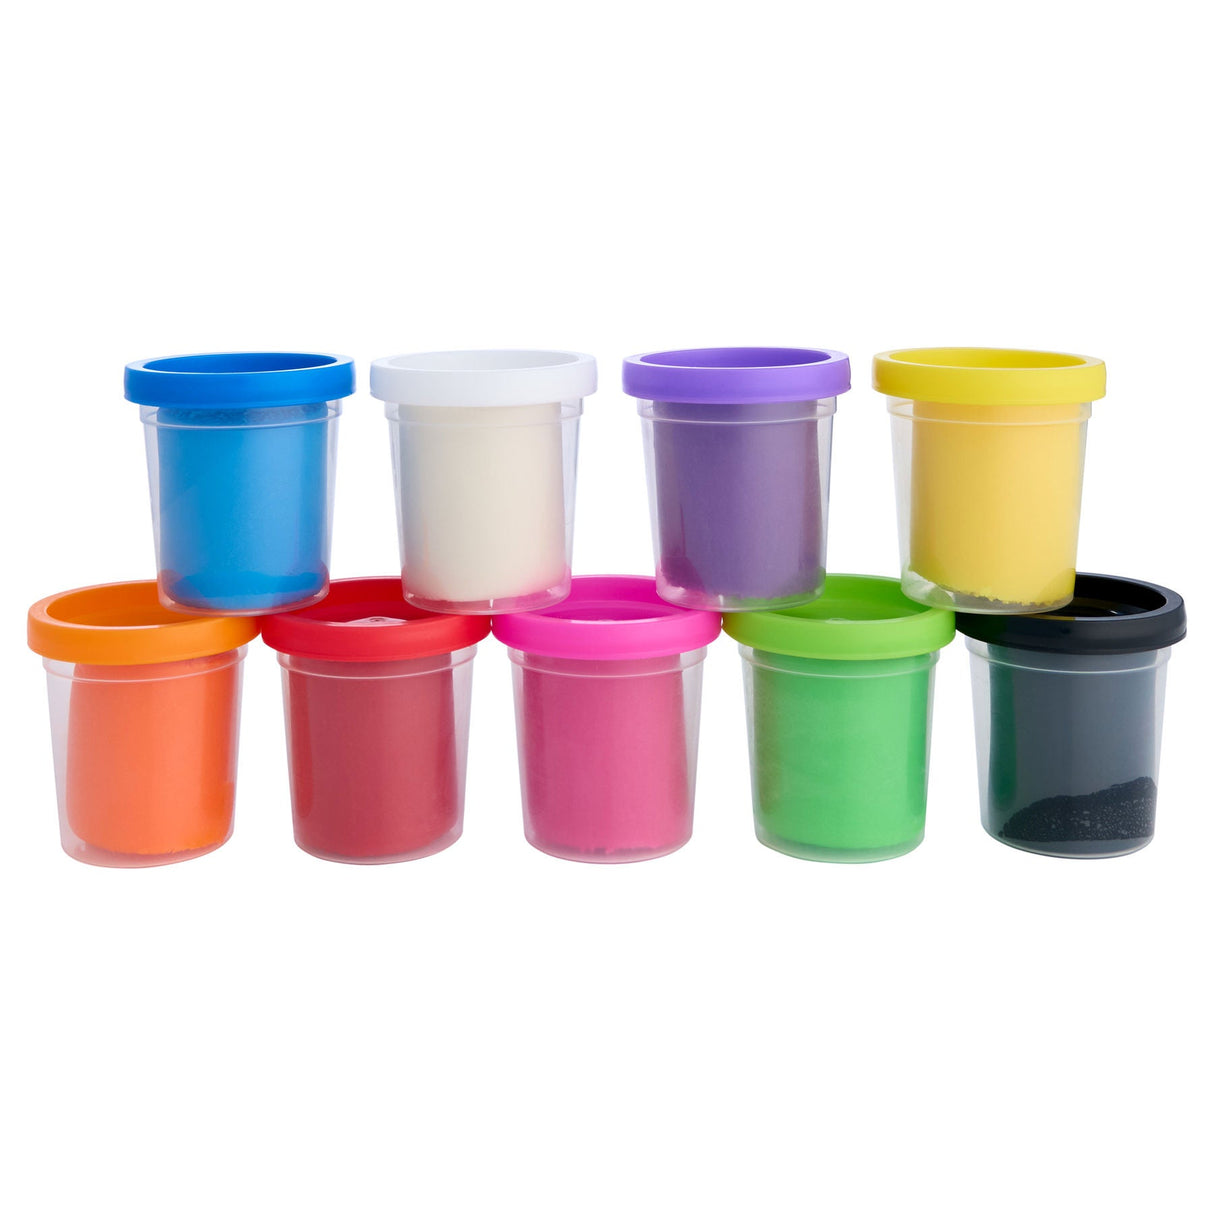 Maped Accessories Play Dough Set - 9 X 56g | Stationery Shop UK